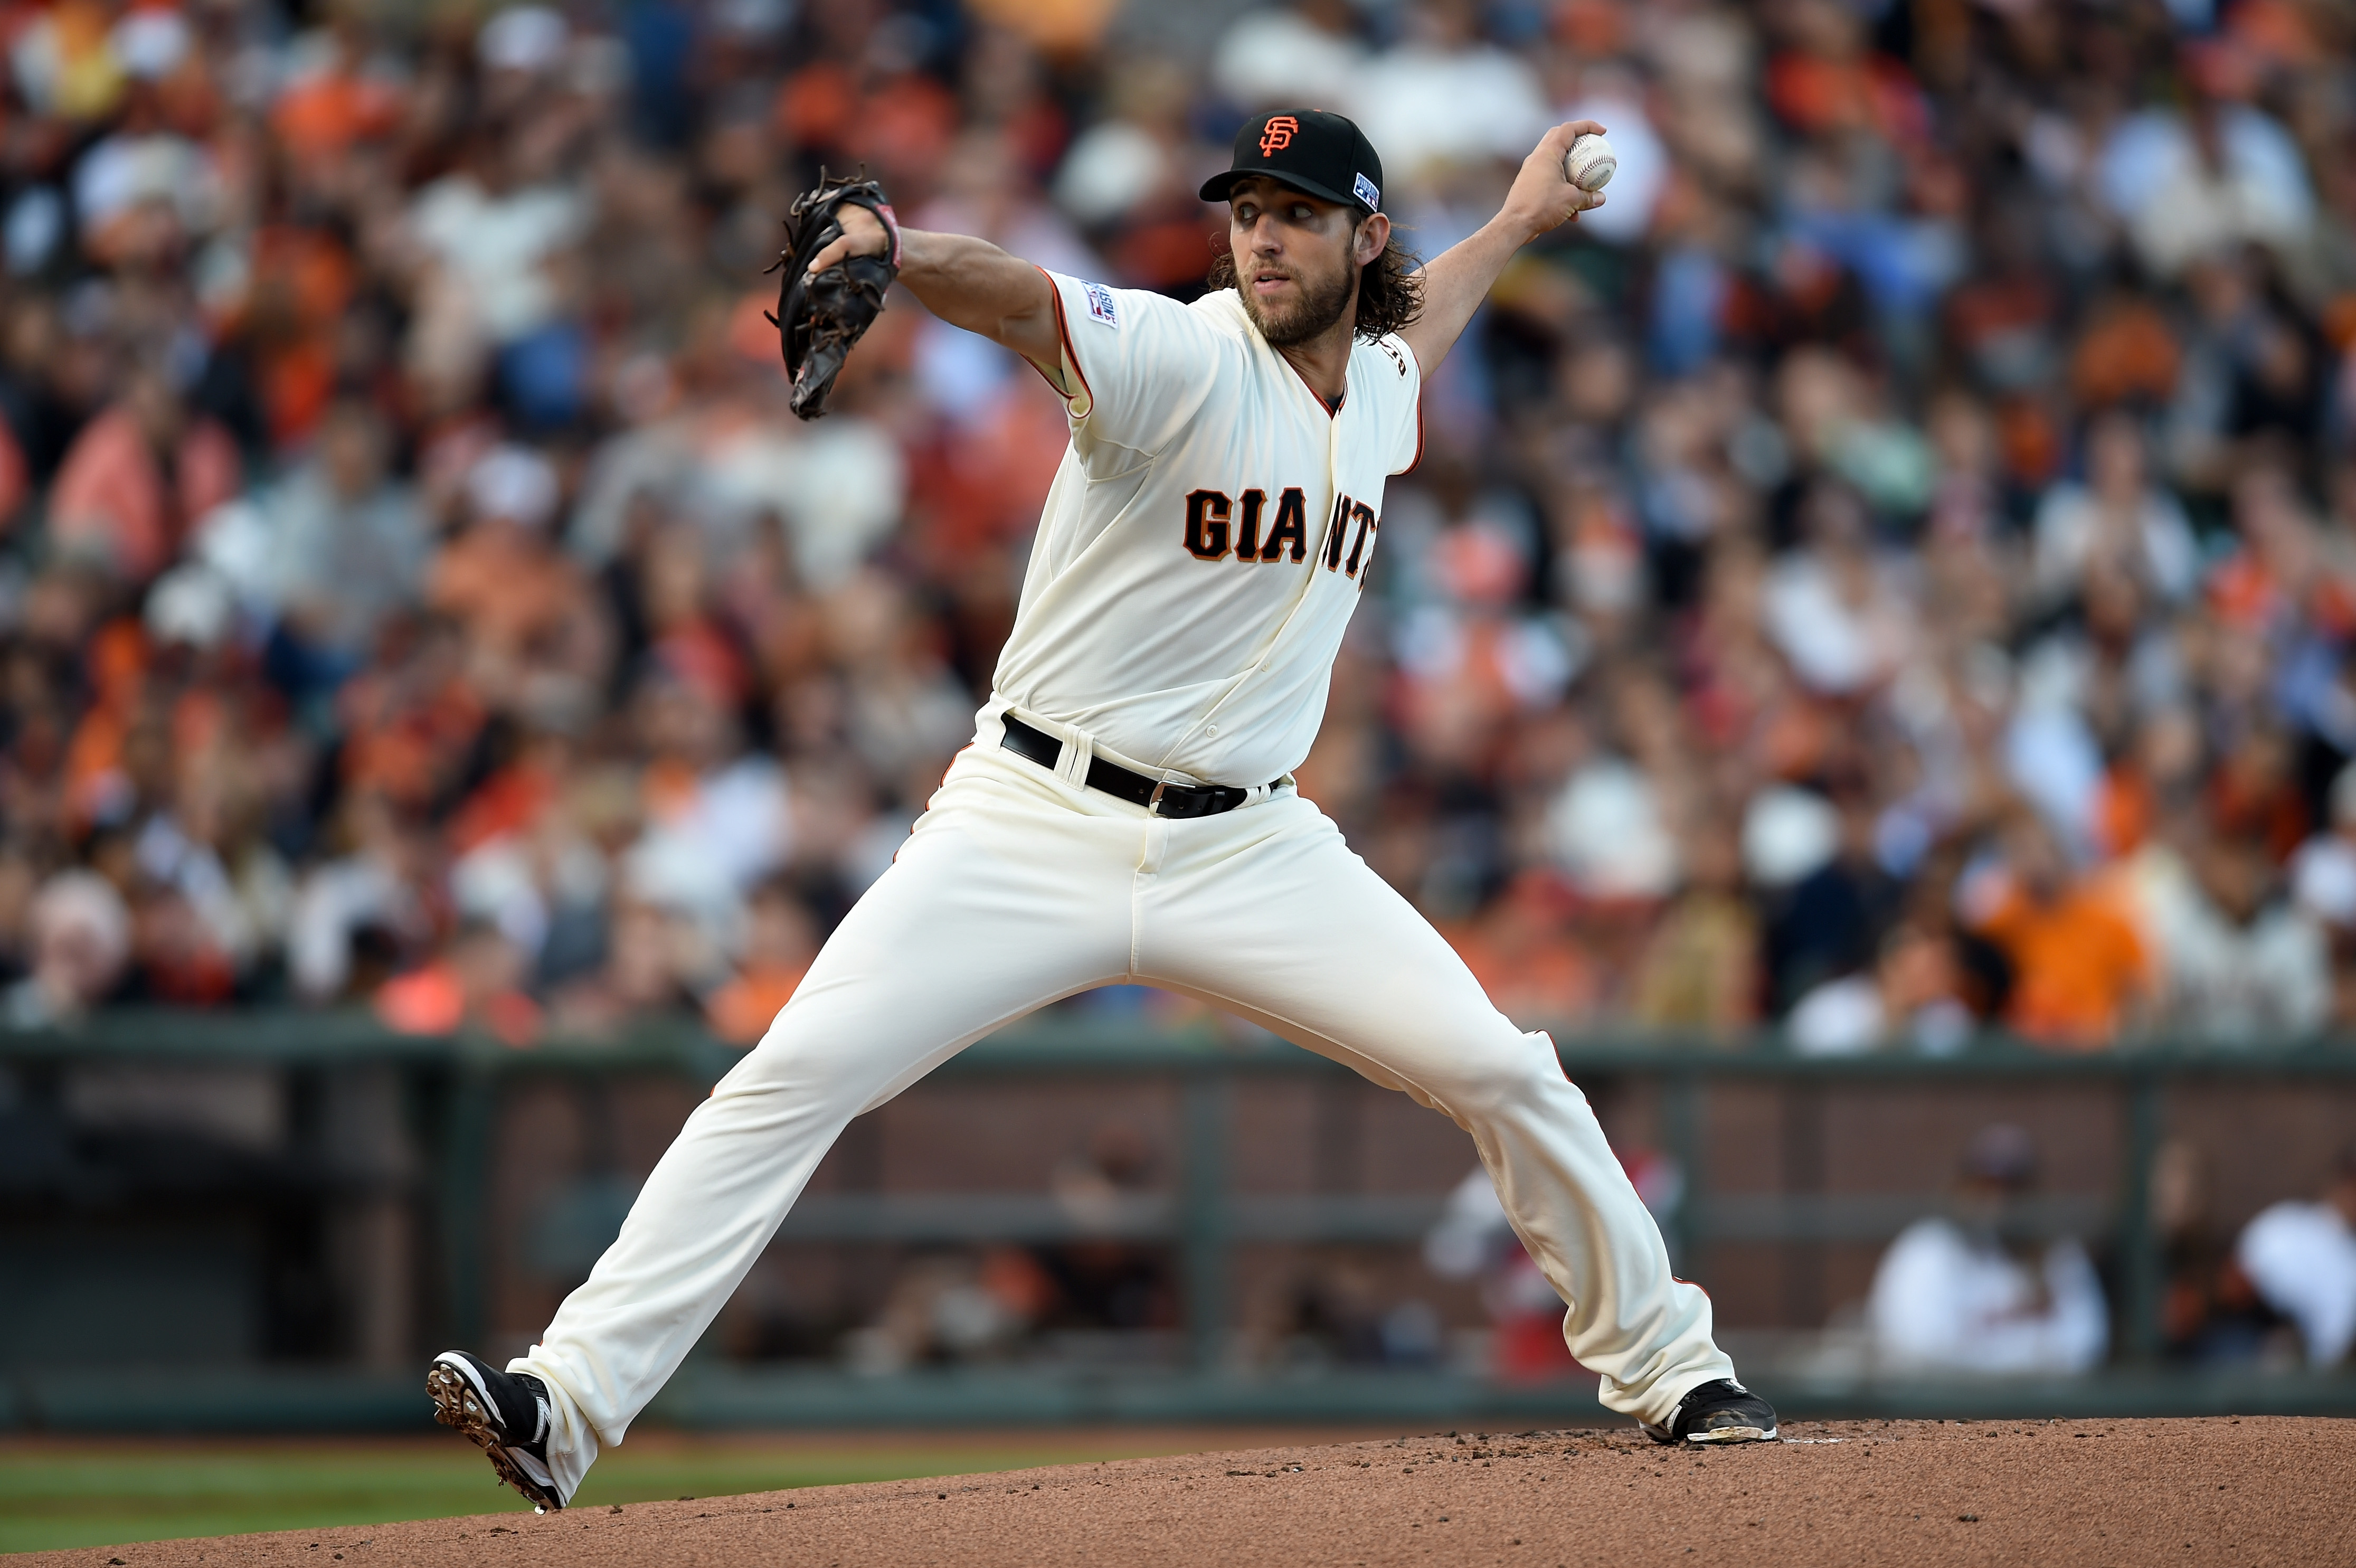 Ali Bumgarner, Madison's Wife: 5 Facts You Need to Know